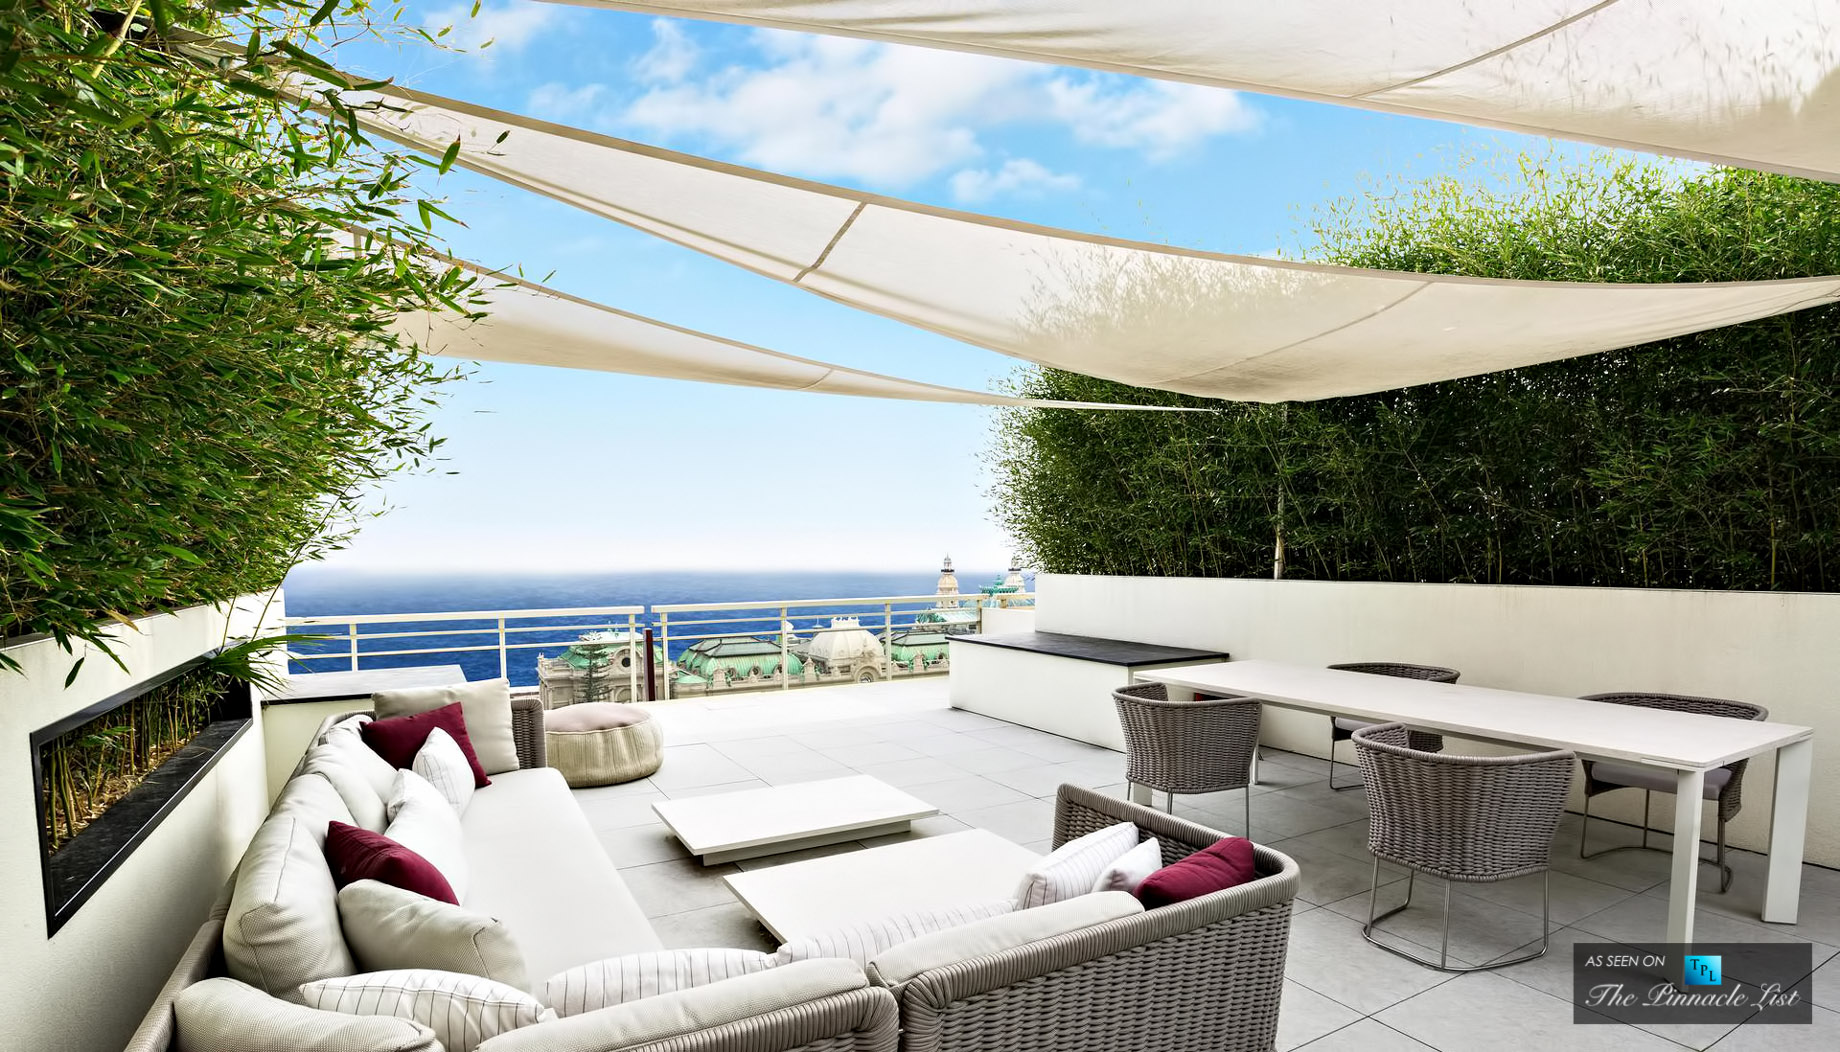 Overlooking the Casino – Rooms with a View – 4 Luxury Penthouses For Sale in Monaco